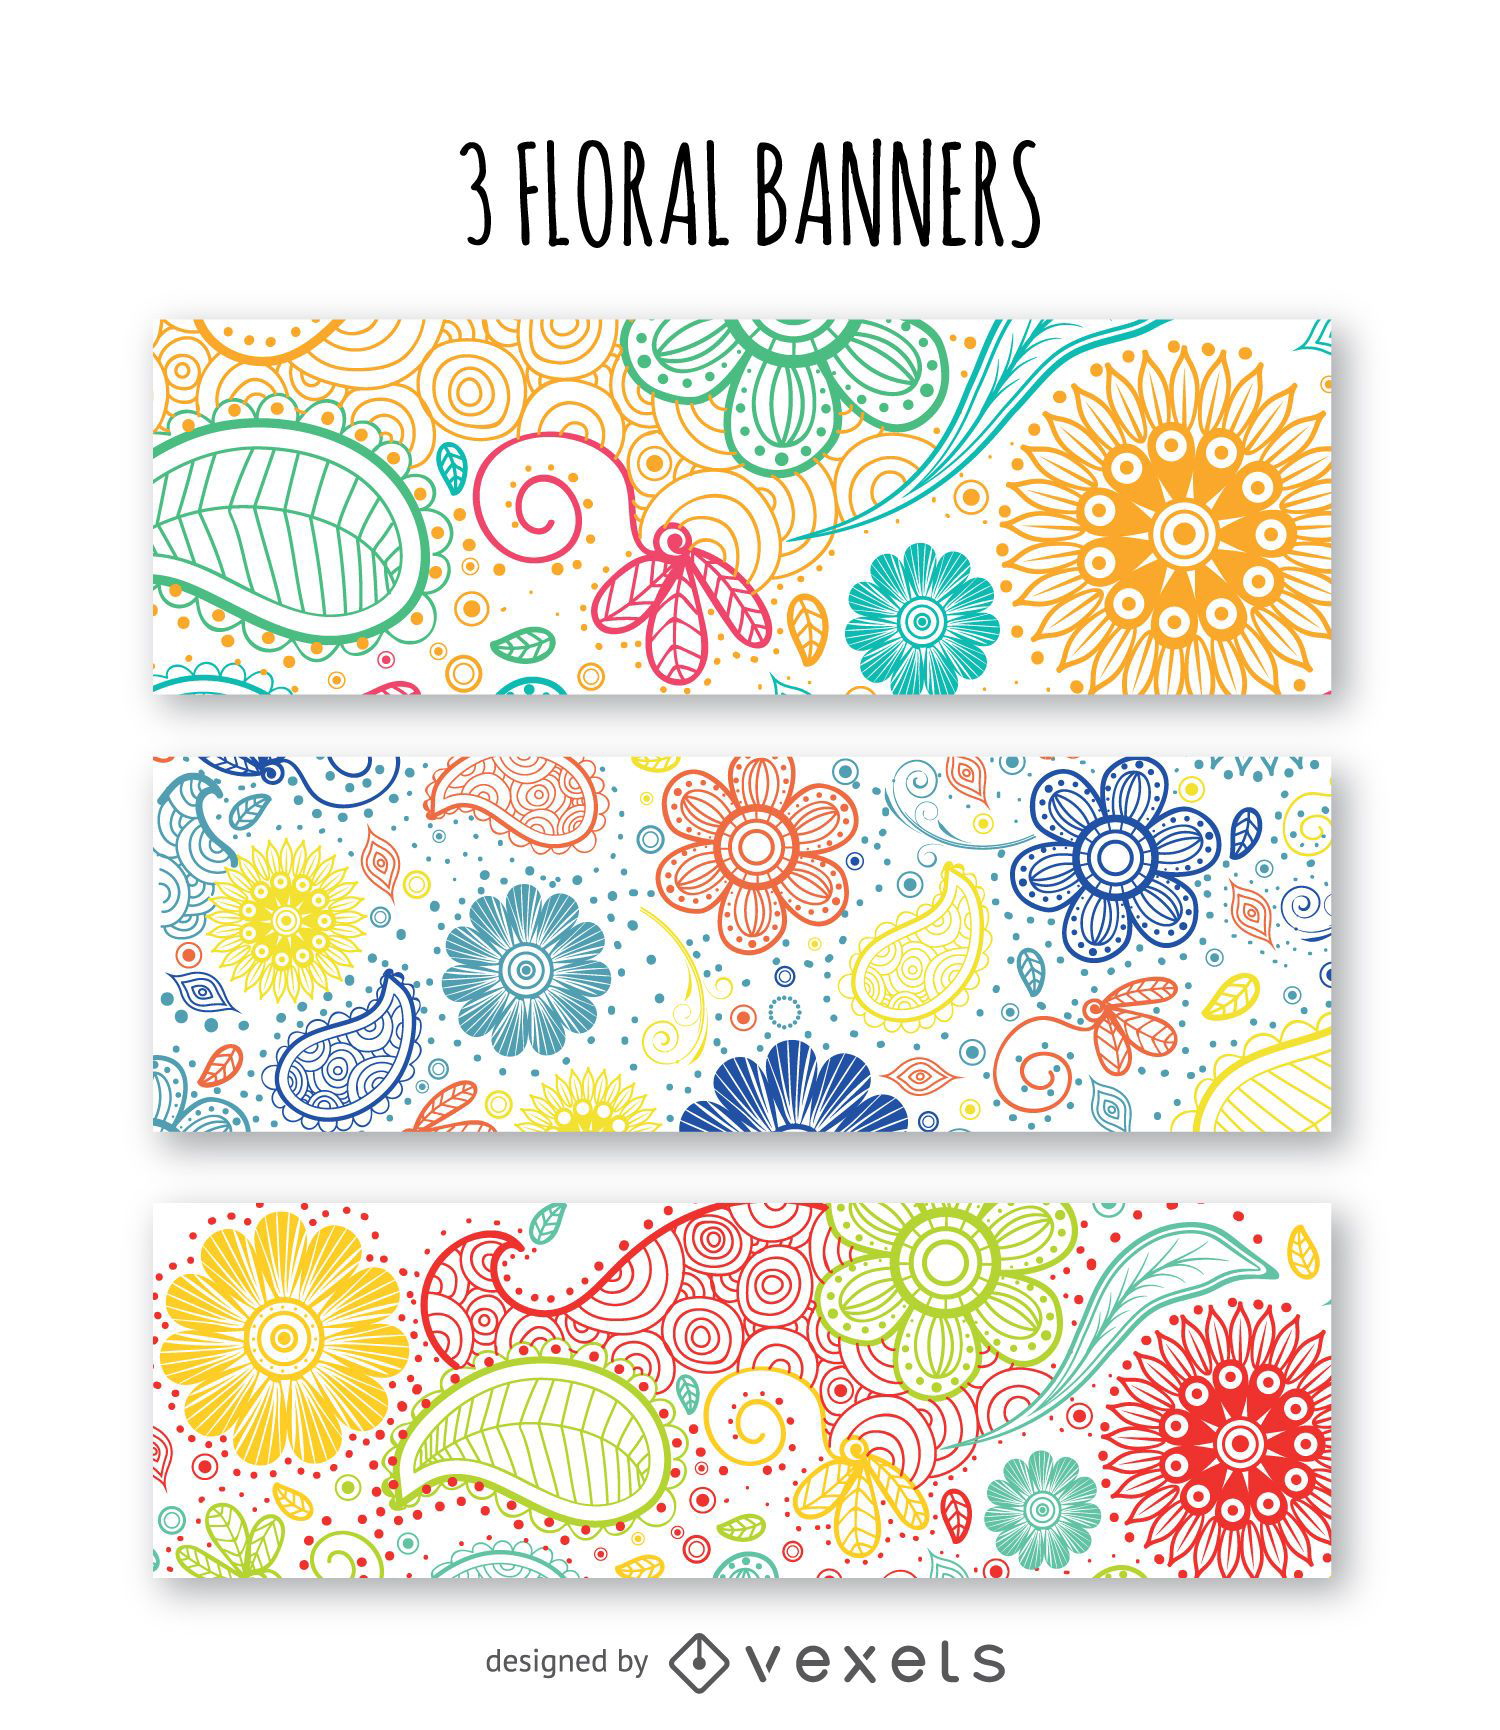 Floral banners set